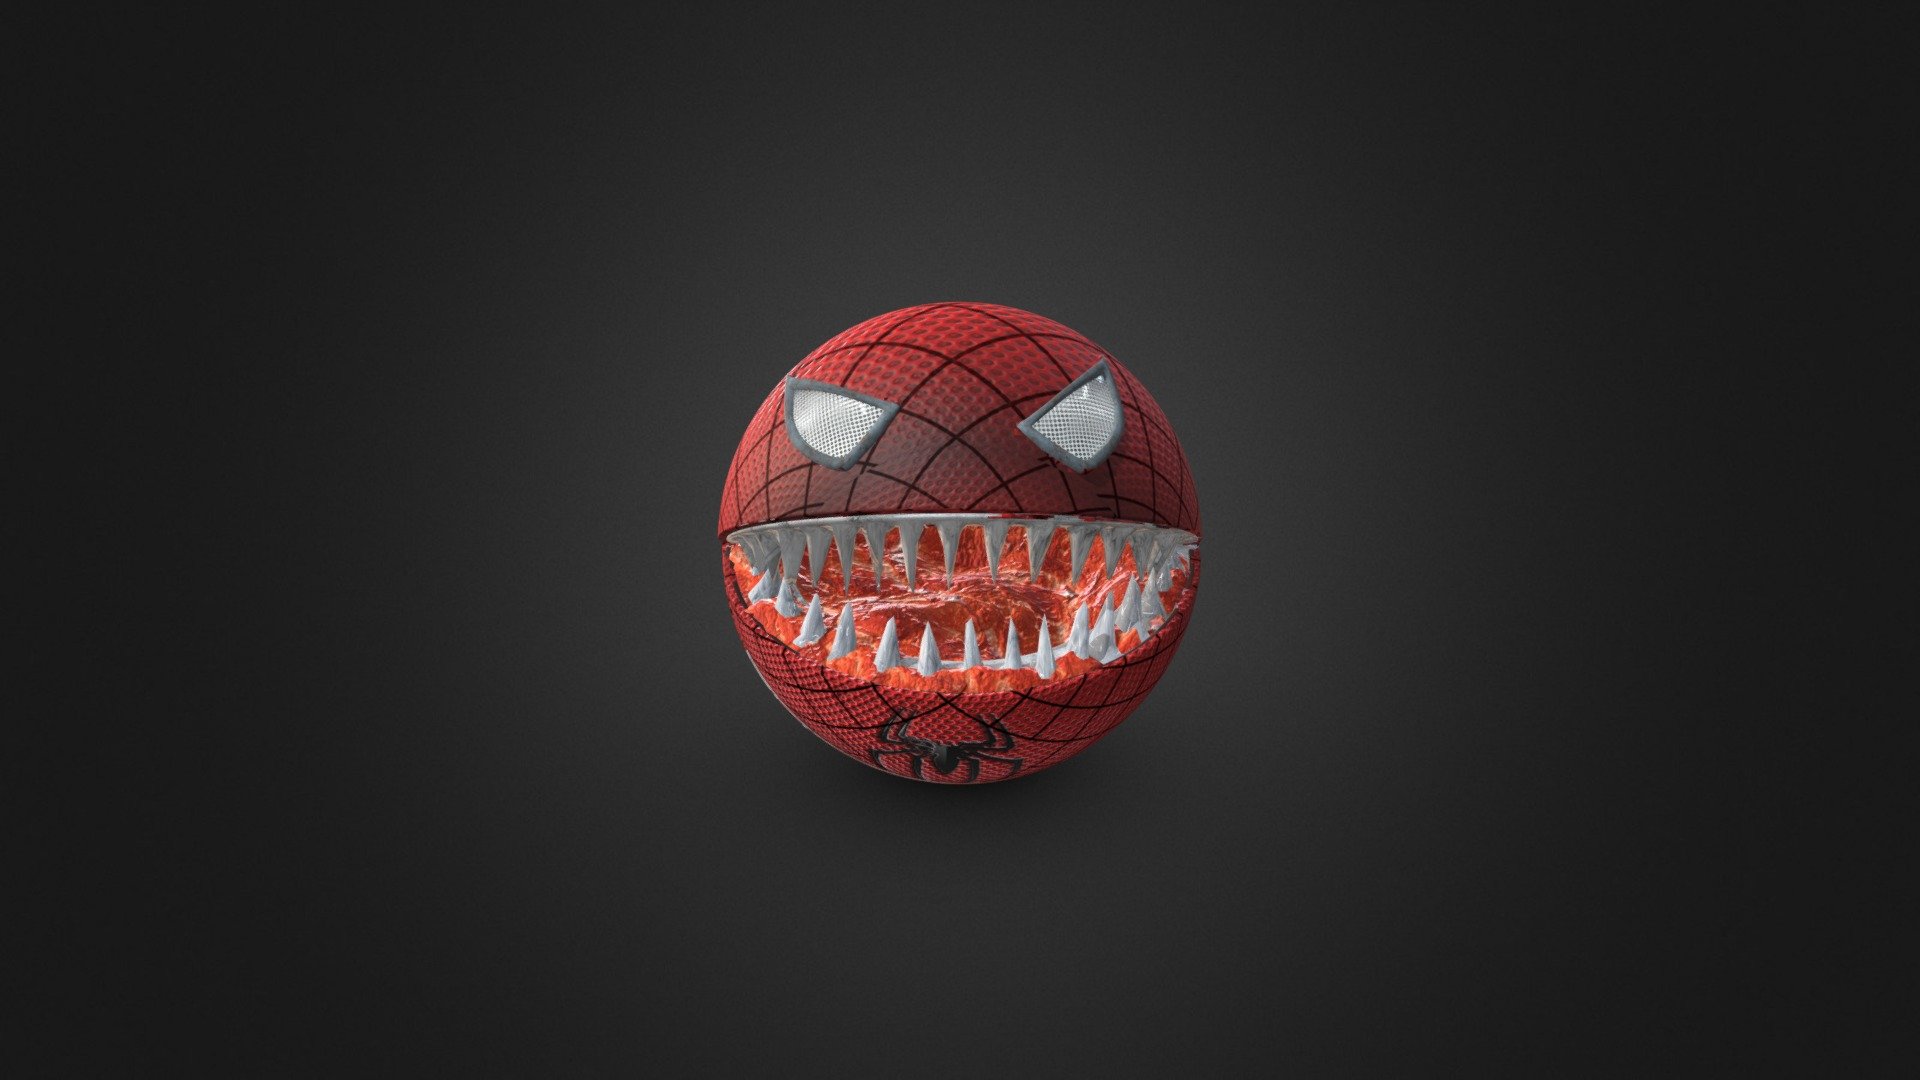 Spiderman pacman angry monster
contact me direct for more pacman. I will create a pacman according to your choice in chipest prize.
contact me.
comment below for contact me
3d model available in all format.
FBX format
stl format
obj format
textures file 
blend file - Spiderman Pacman - 3D model by Mohammed Sajid (@manishyadav2150) 3d model